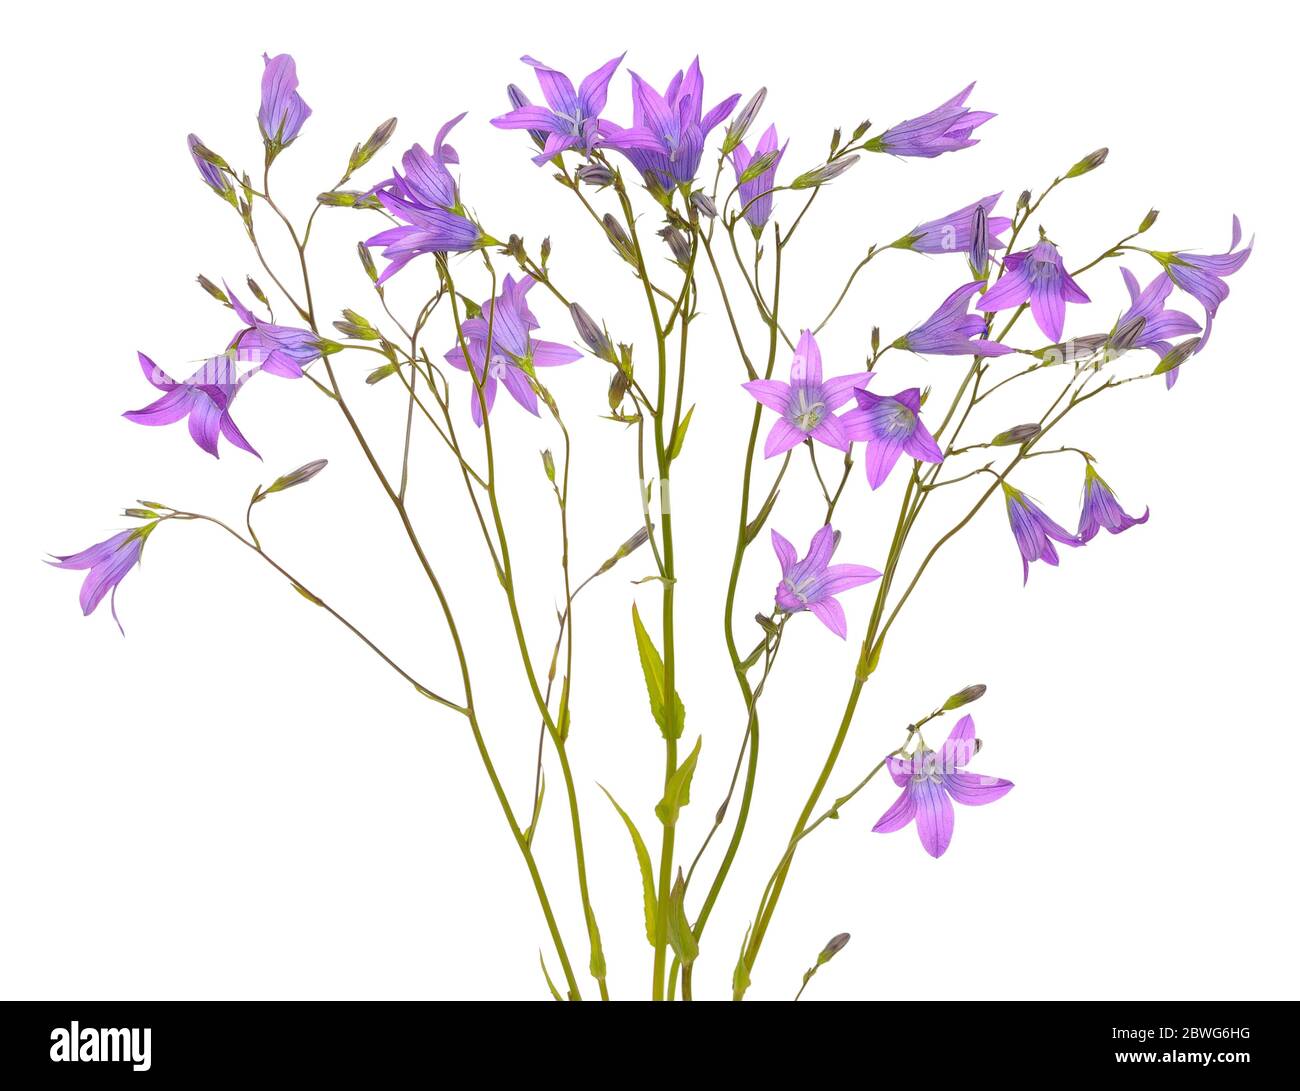 Campanula flowers isolated on a white background Stock Photo